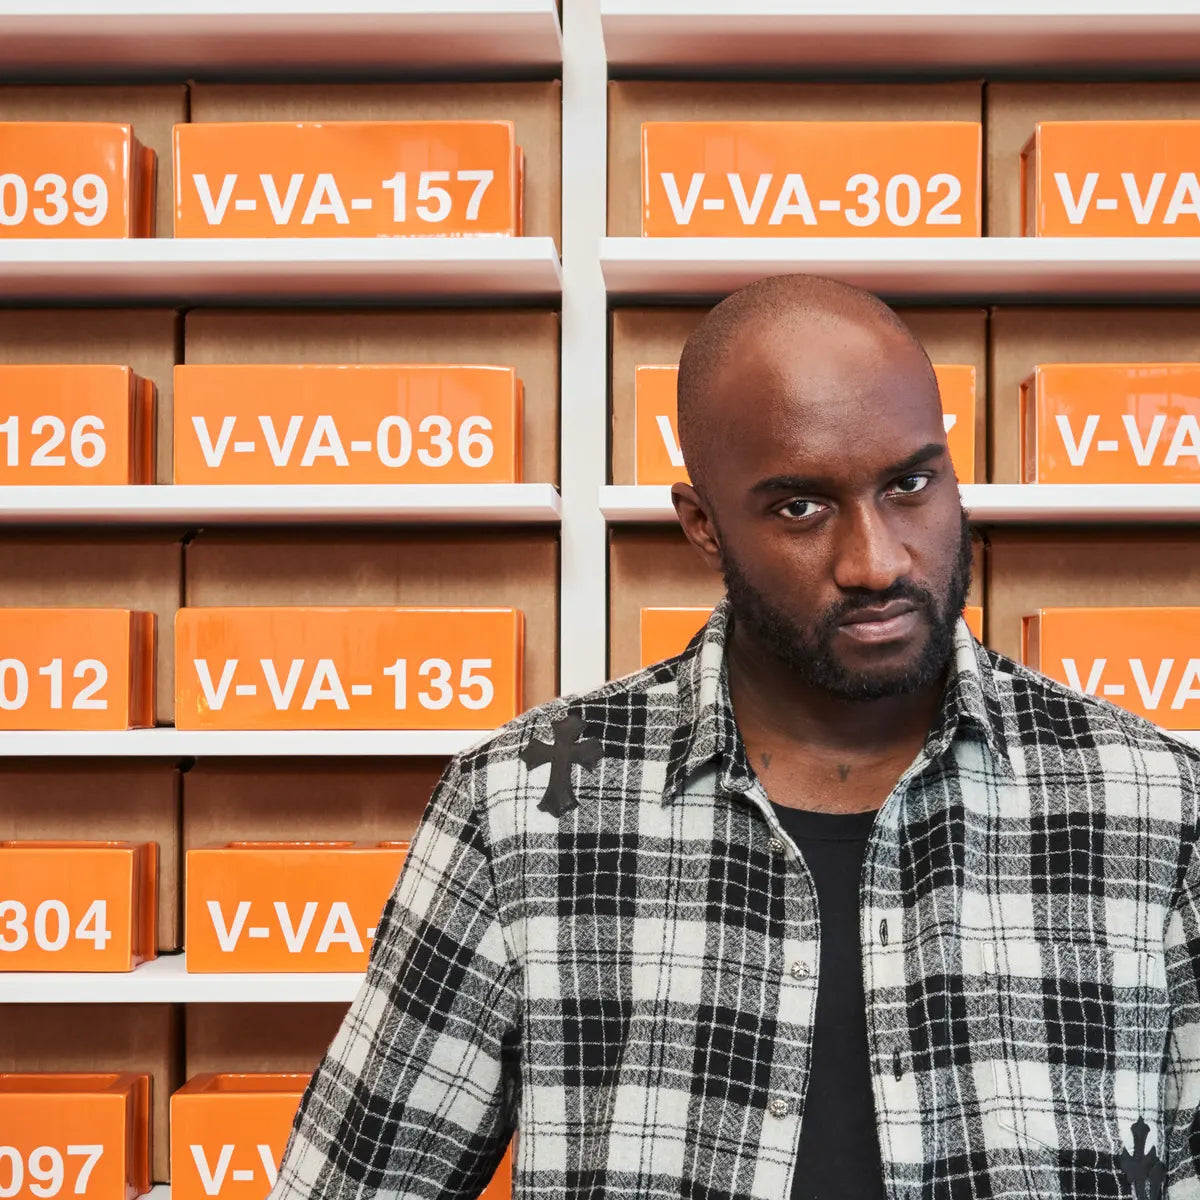 Buy a Piece of Virgil Abloh c/o Vitra Show for $167